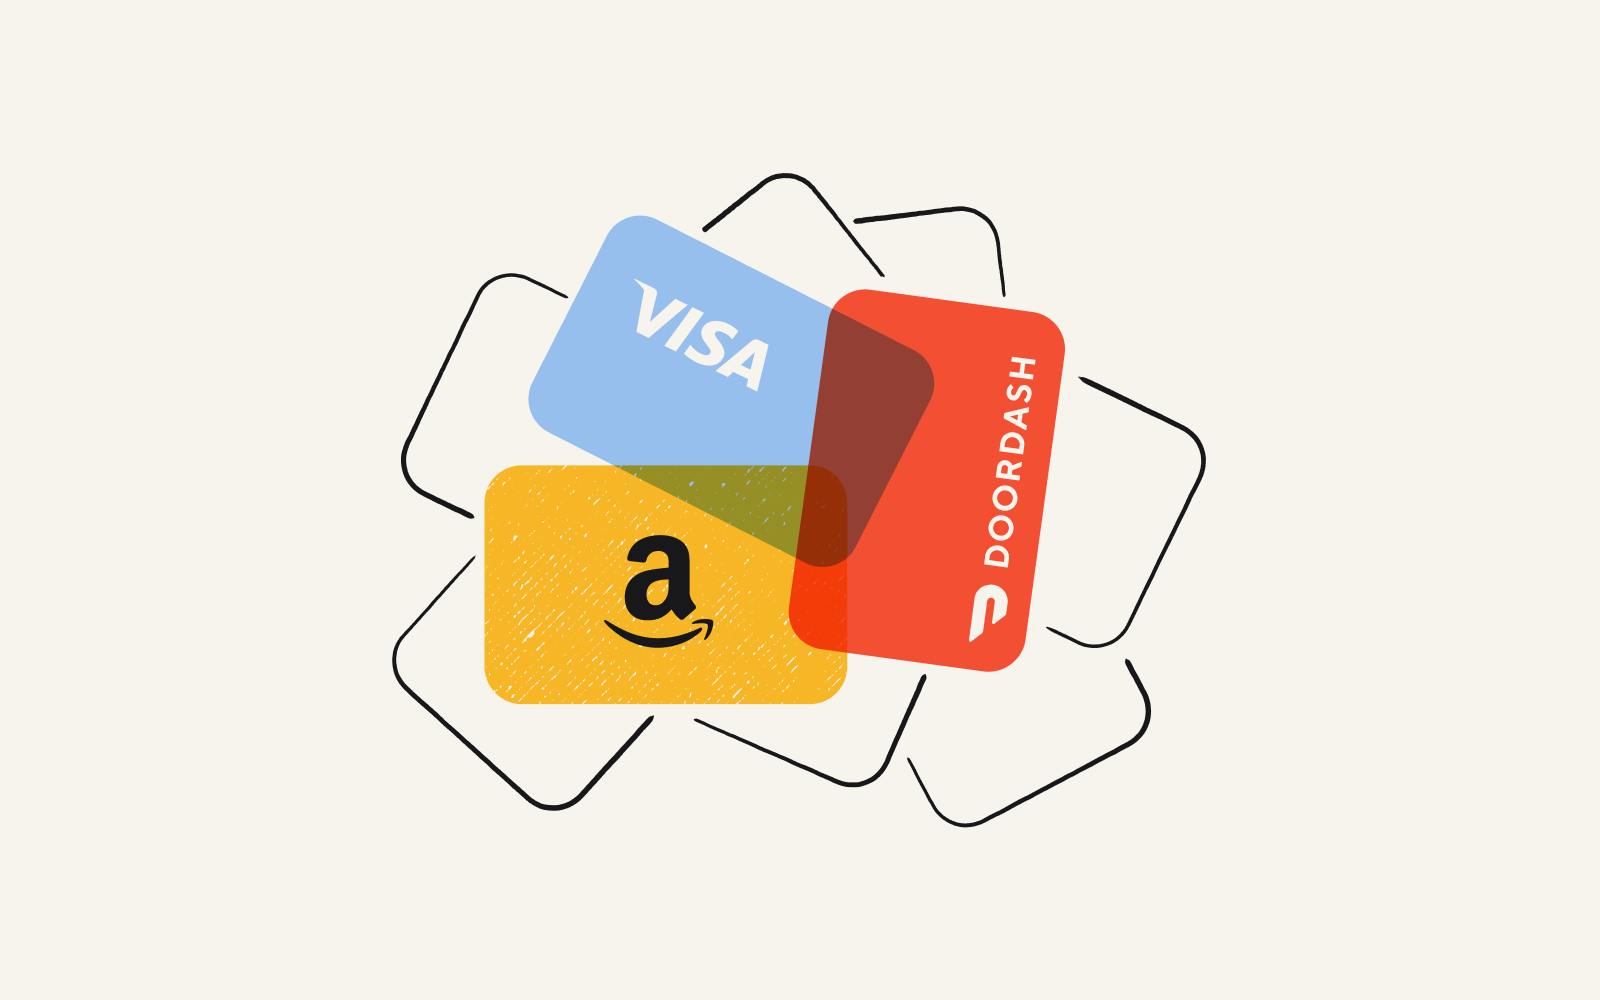 A pile of gift cards, including Amazon, Visa, and Doordash.